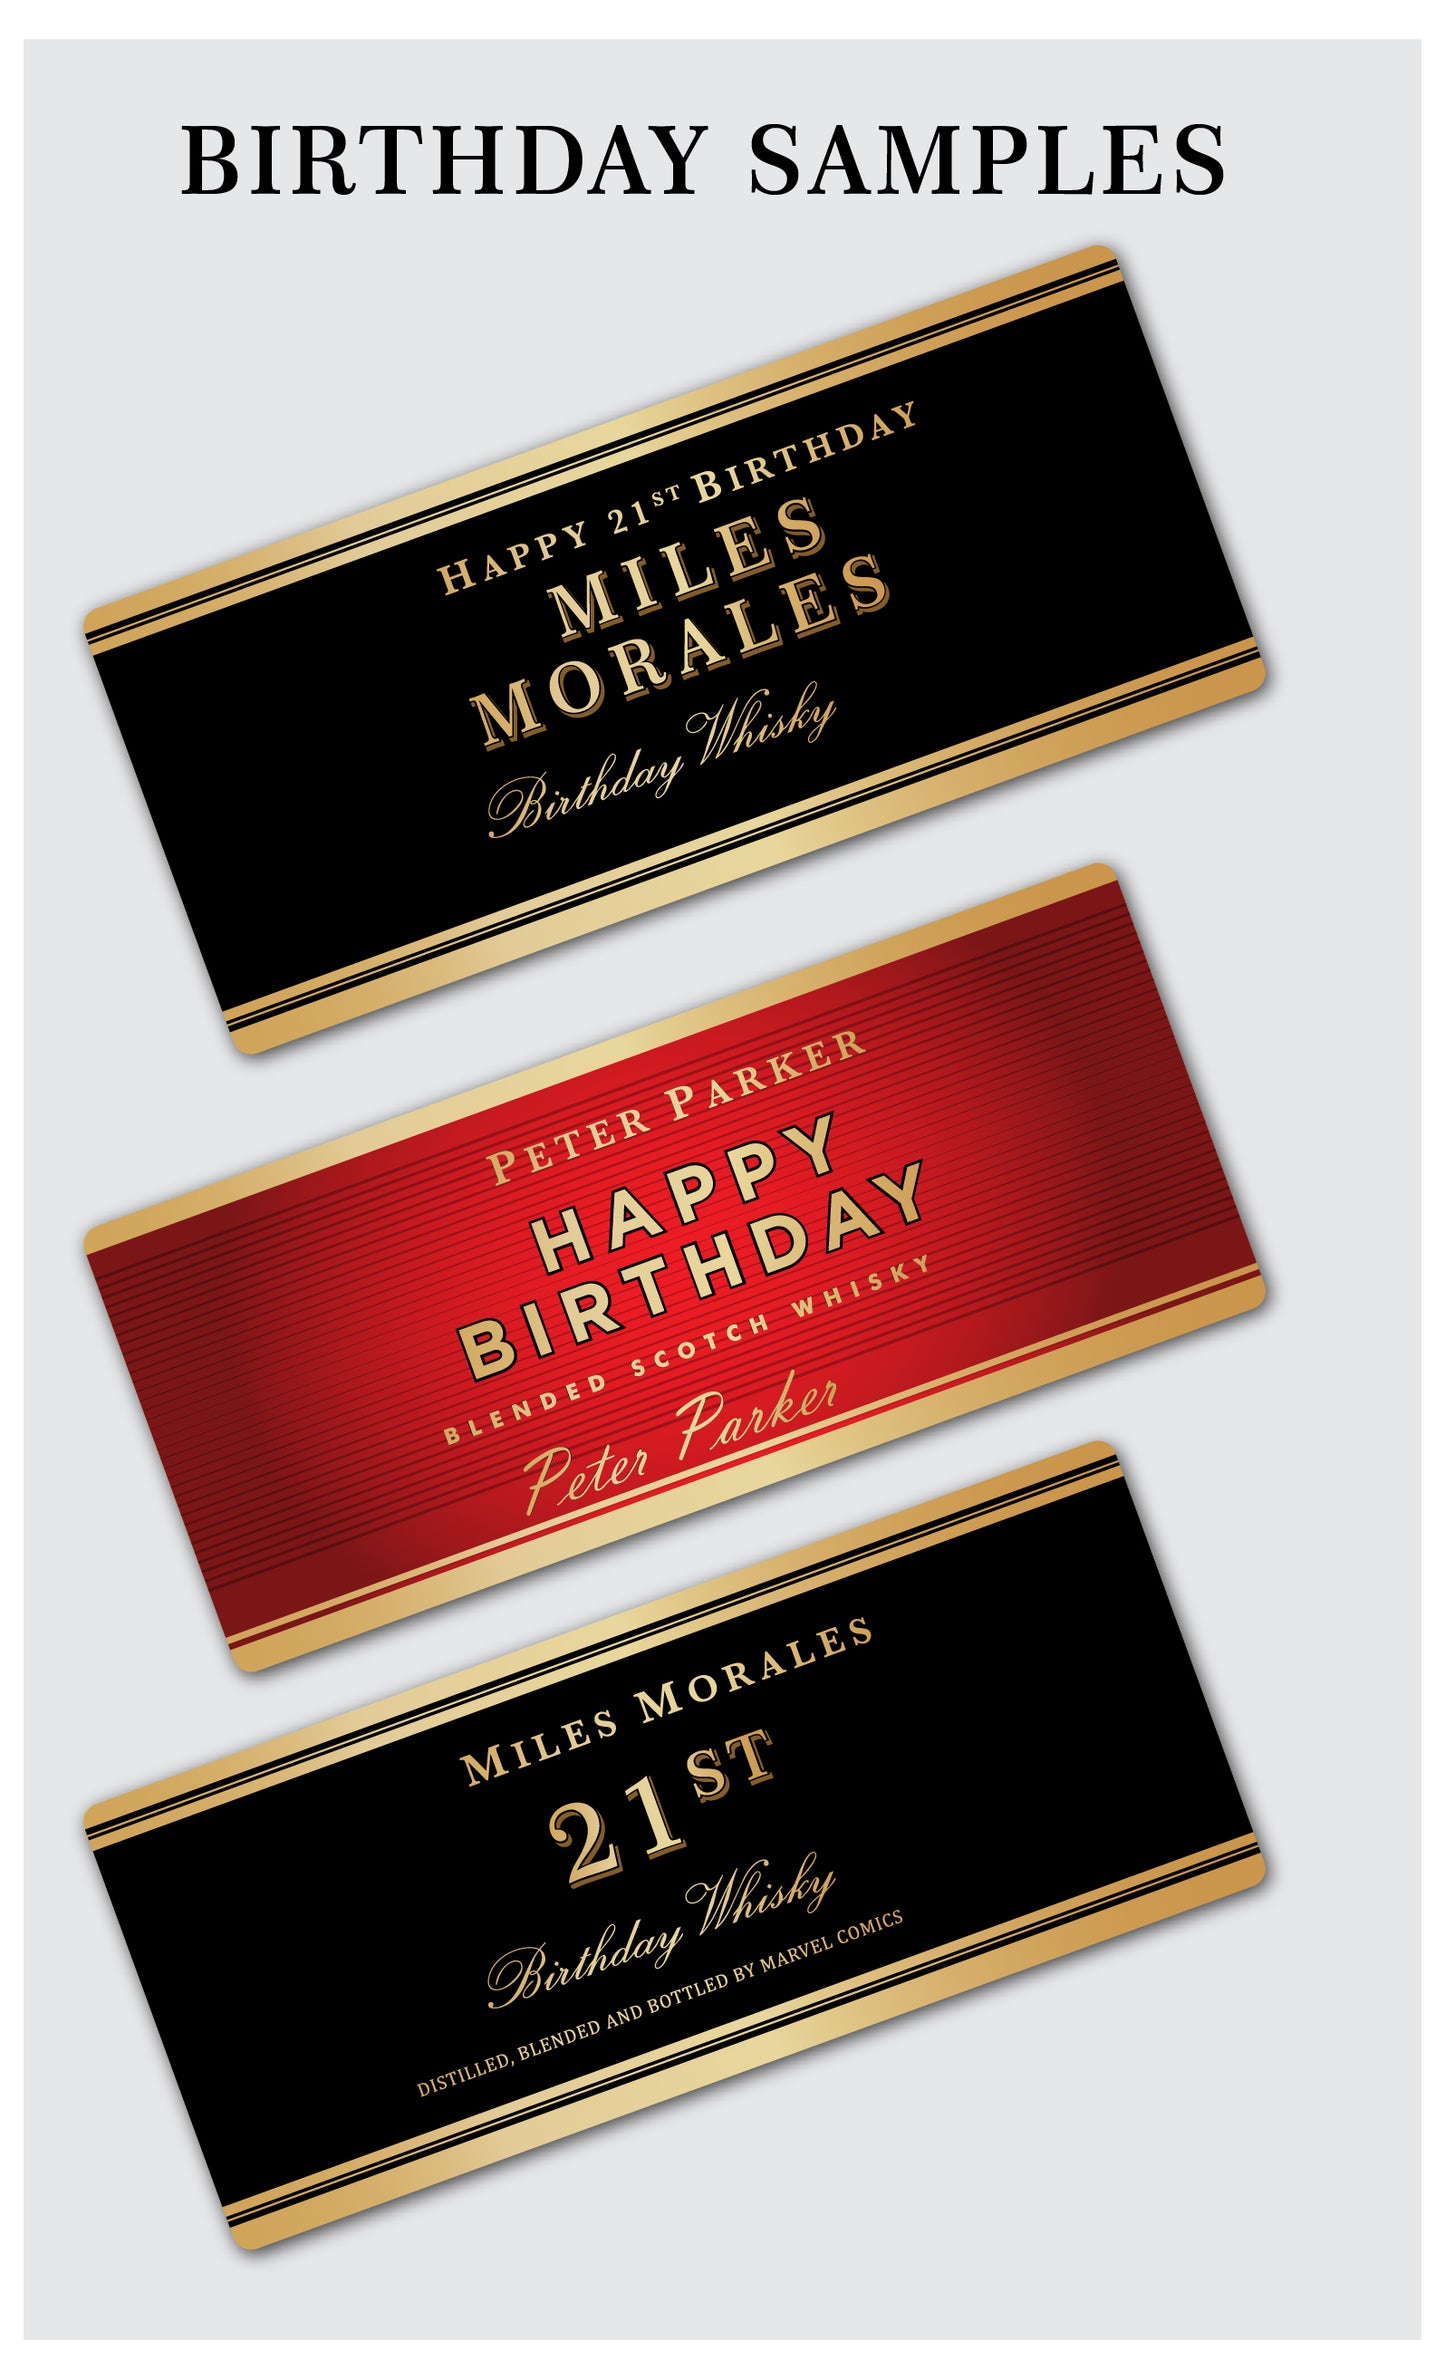 Personalized Label to fit Johnny Walker Bottles